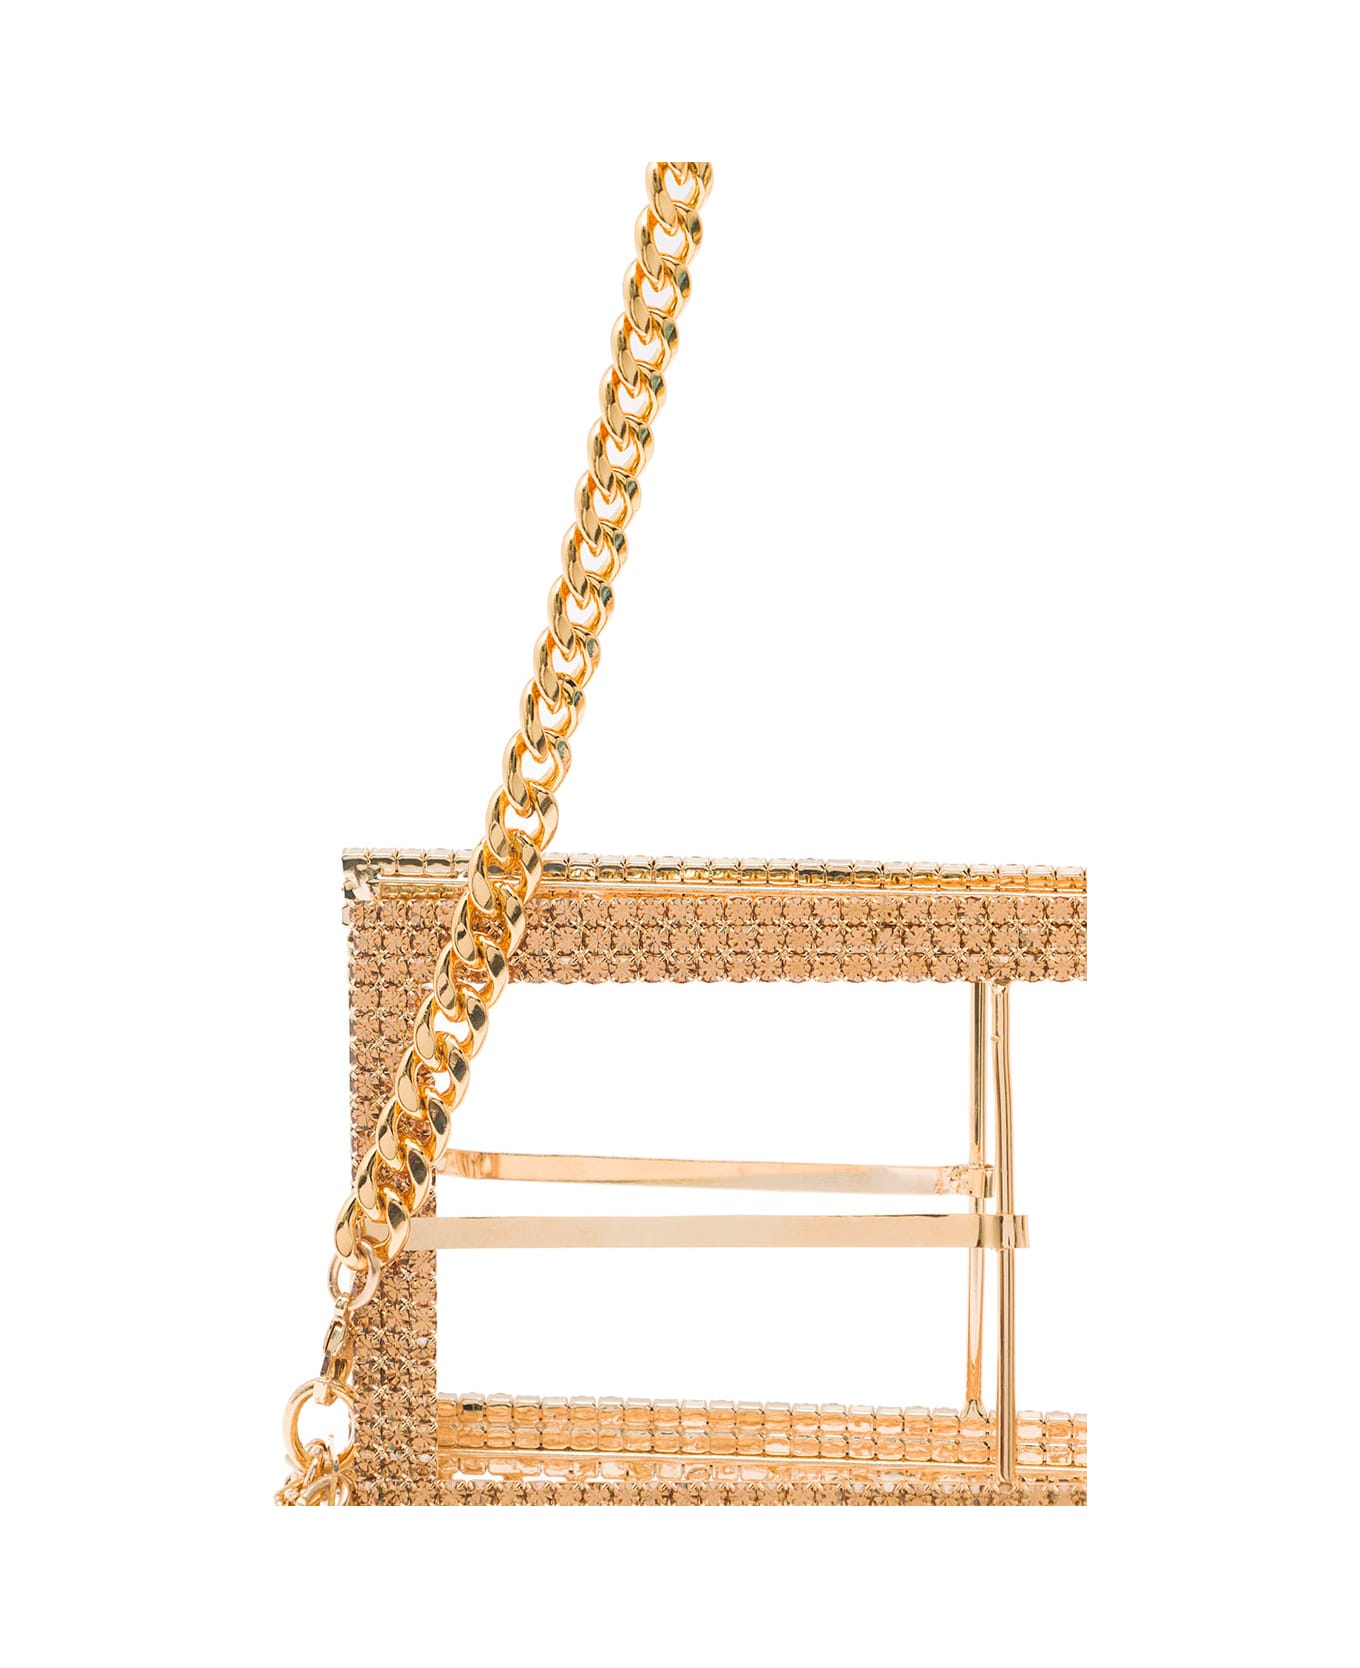 Silvia Gnecchi 'downtown Bag' Gold-colored Shoulder Bag With Maxi Buckle In Metal Mesh Woman - Metallic